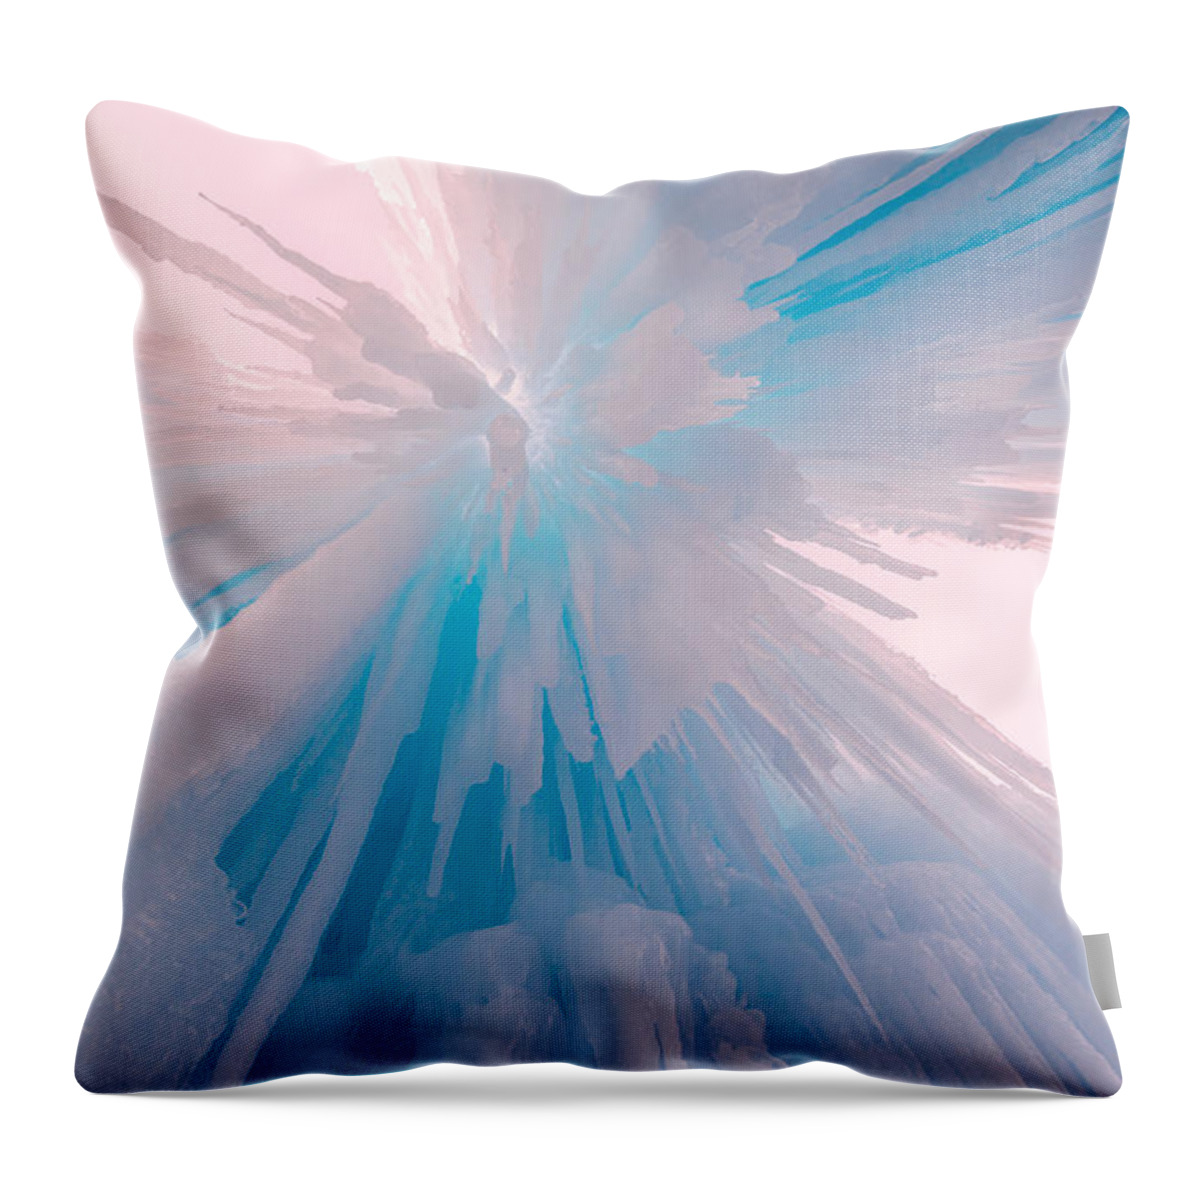 Frozen Throw Pillow featuring the photograph Frozen by Chad Dutson